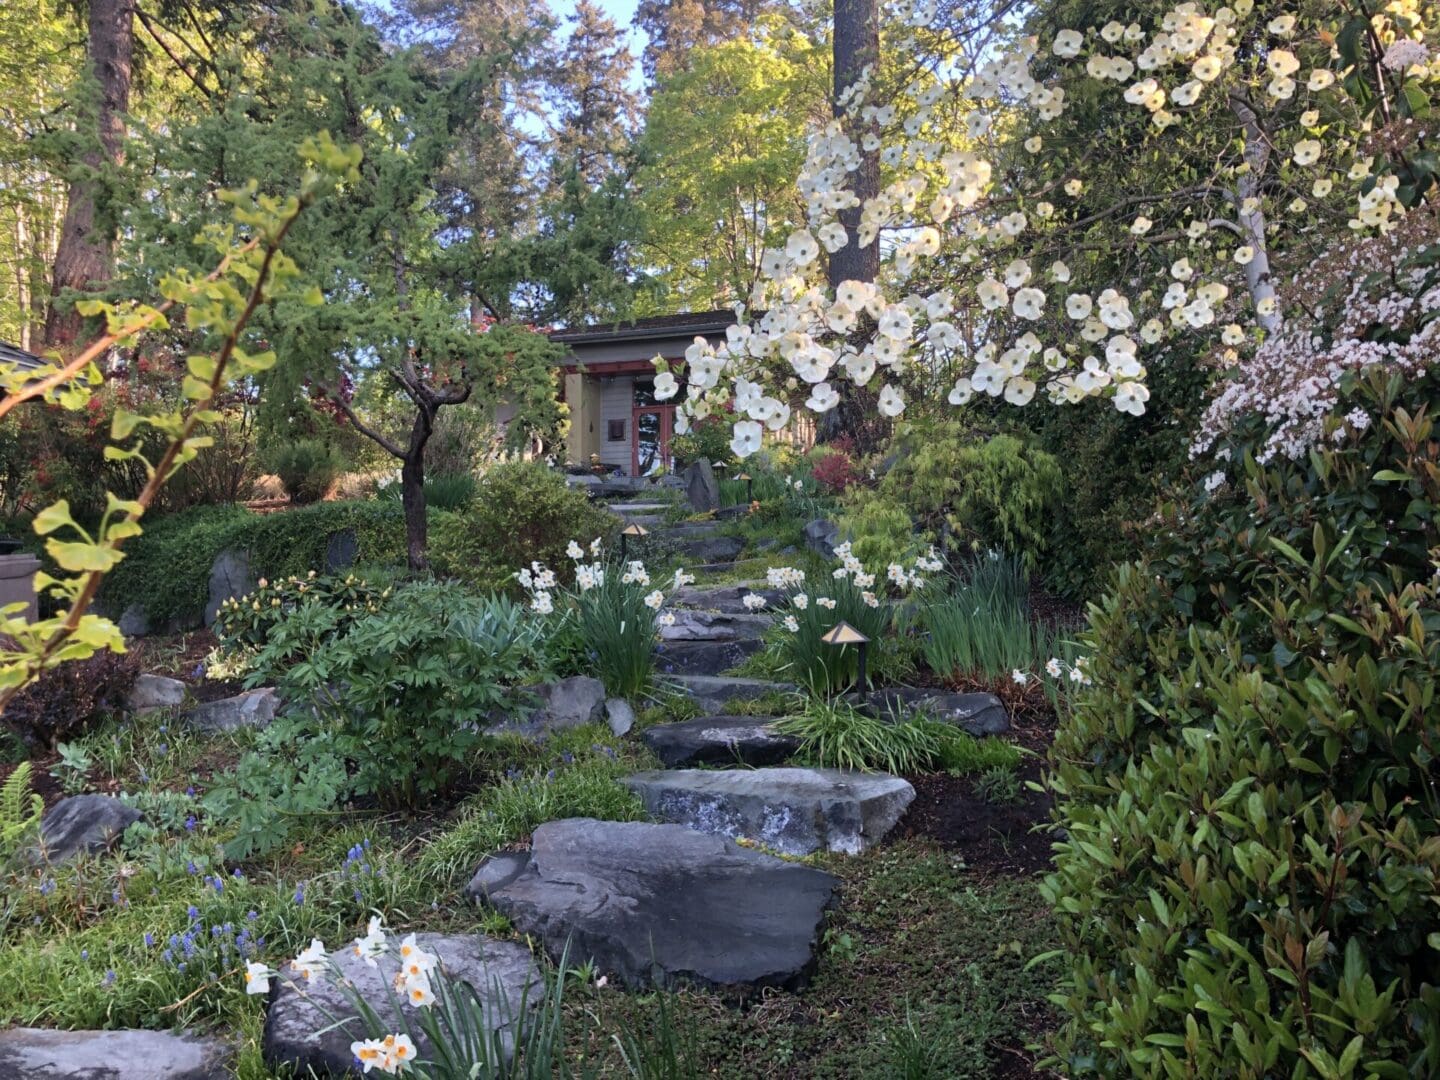 A garden with many flowers and trees